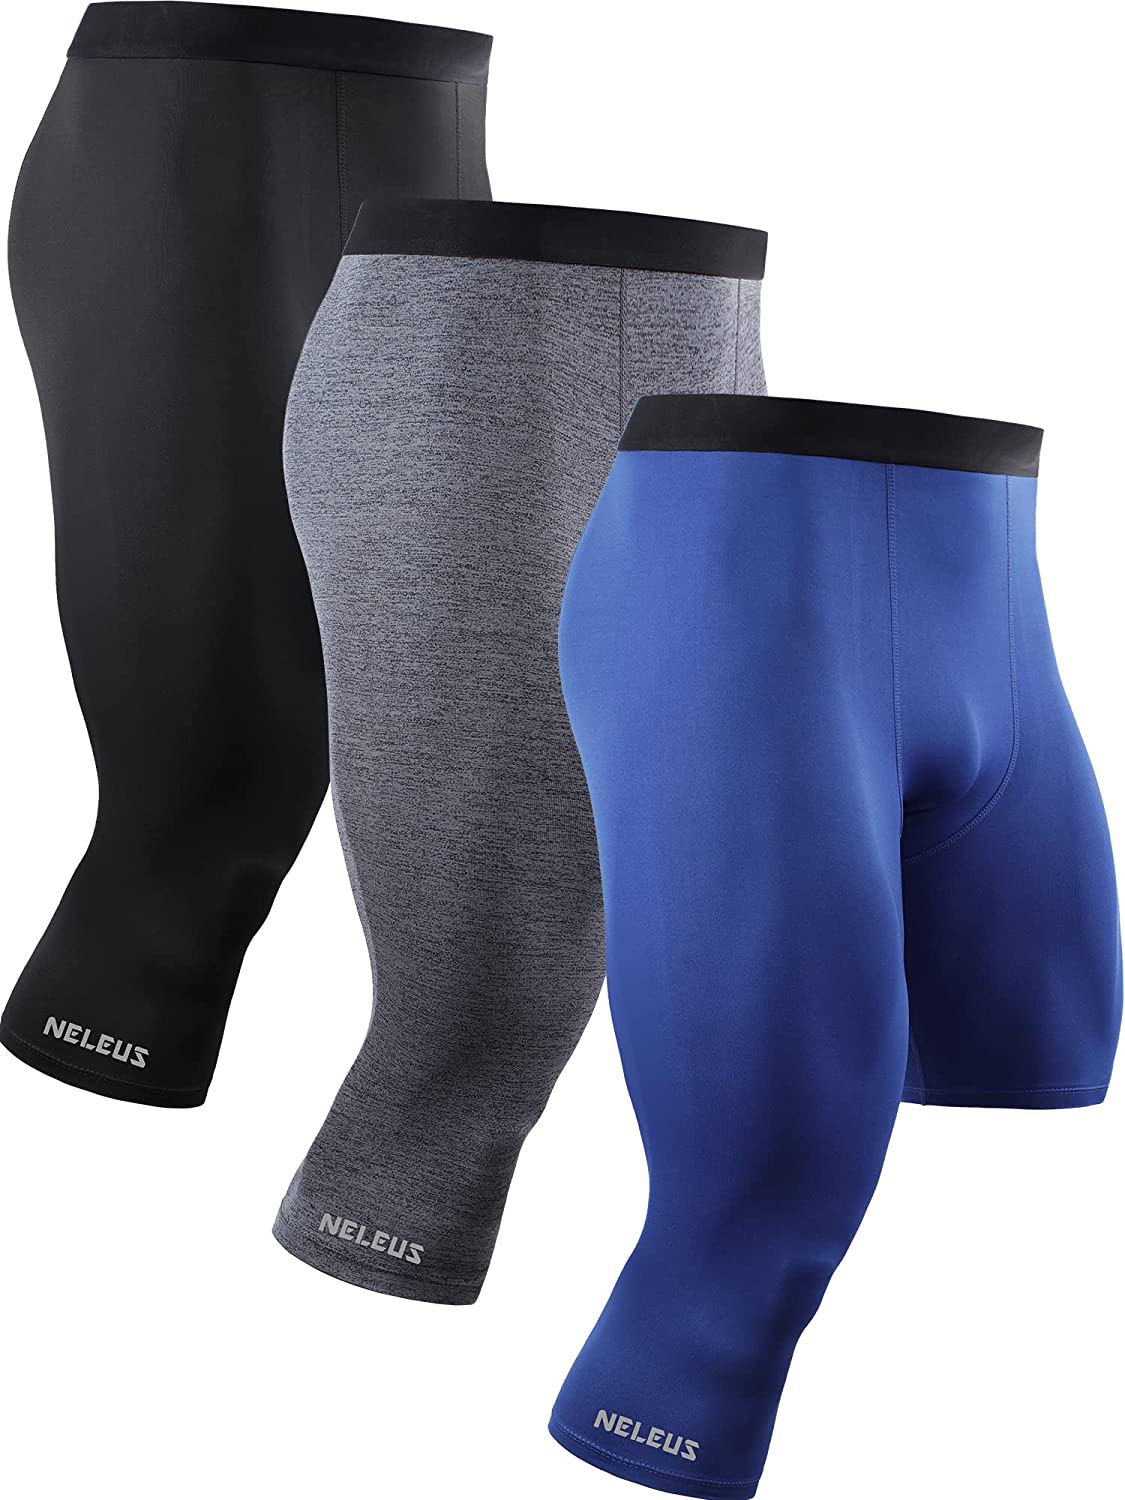 NELEUS Mens Dry Fit Compression Pants 2 Pack Running Tights